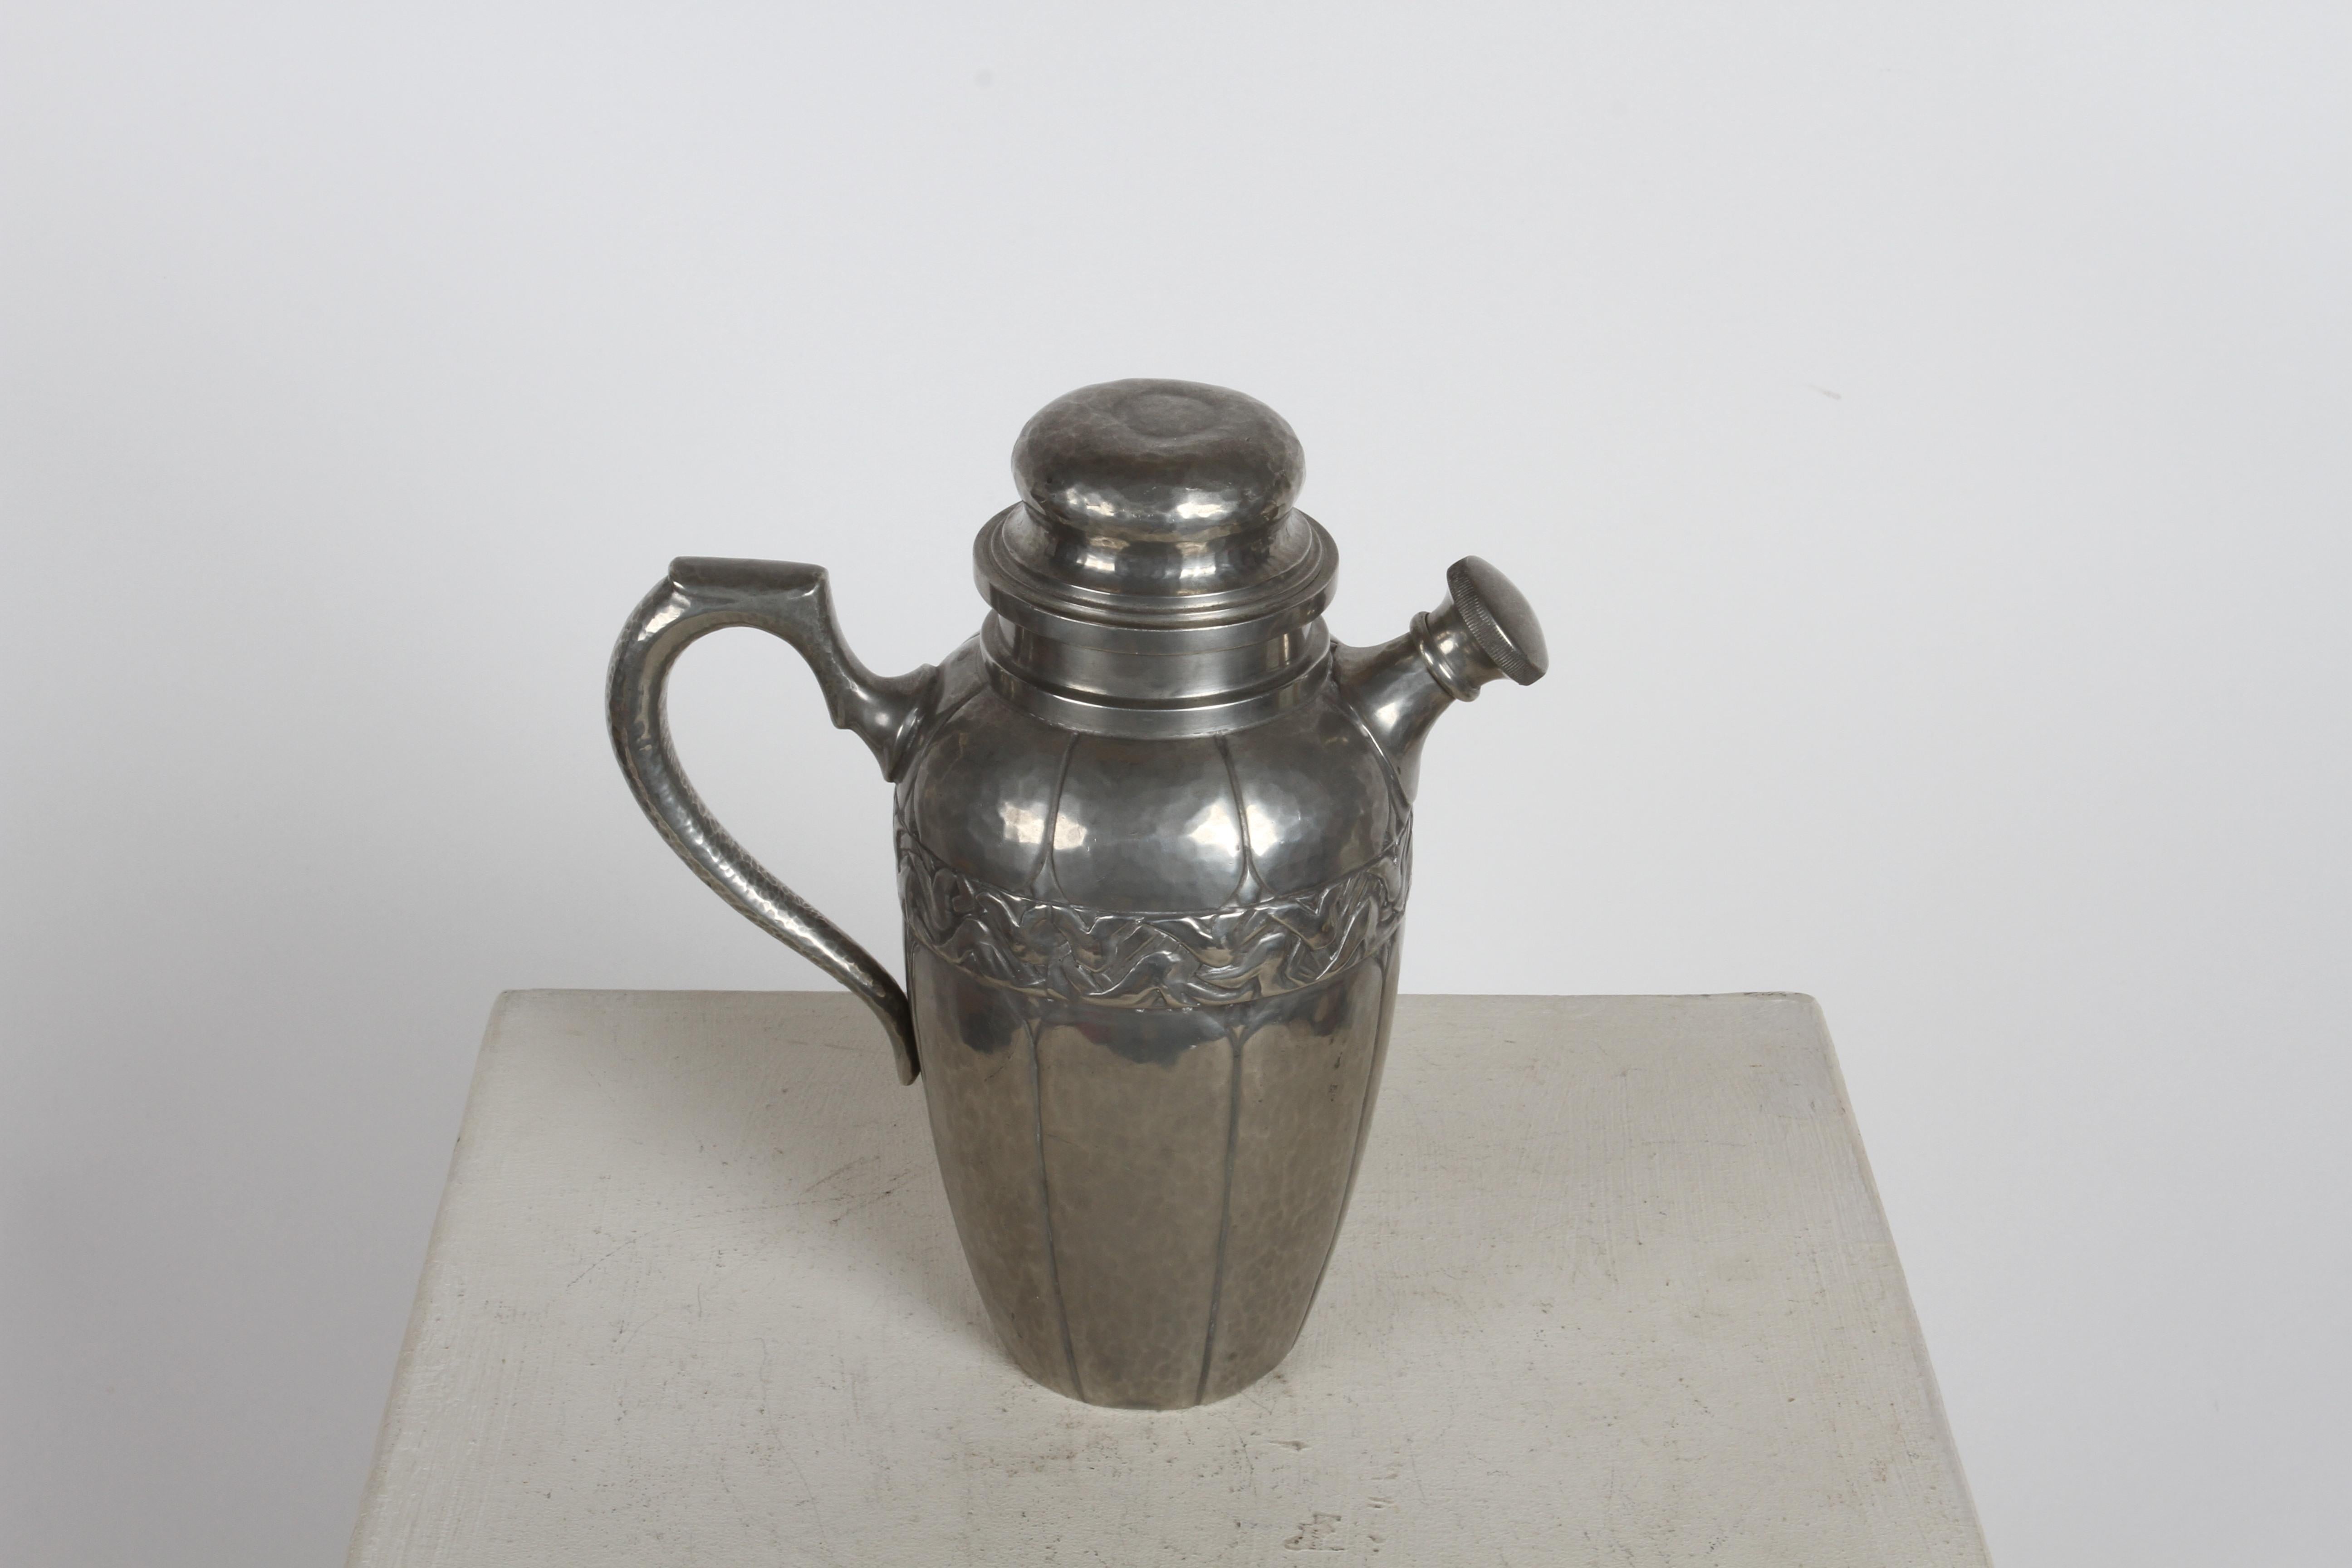 Rare 1920s Art Deco period cocktail shaker by Einar Dragsted (1887-1967) Danish Silversmiths in pewter with handle, spout and removable top. This hand wrought and hand hammered shakers has a warm patina to its pewter, with incised vertical lines,